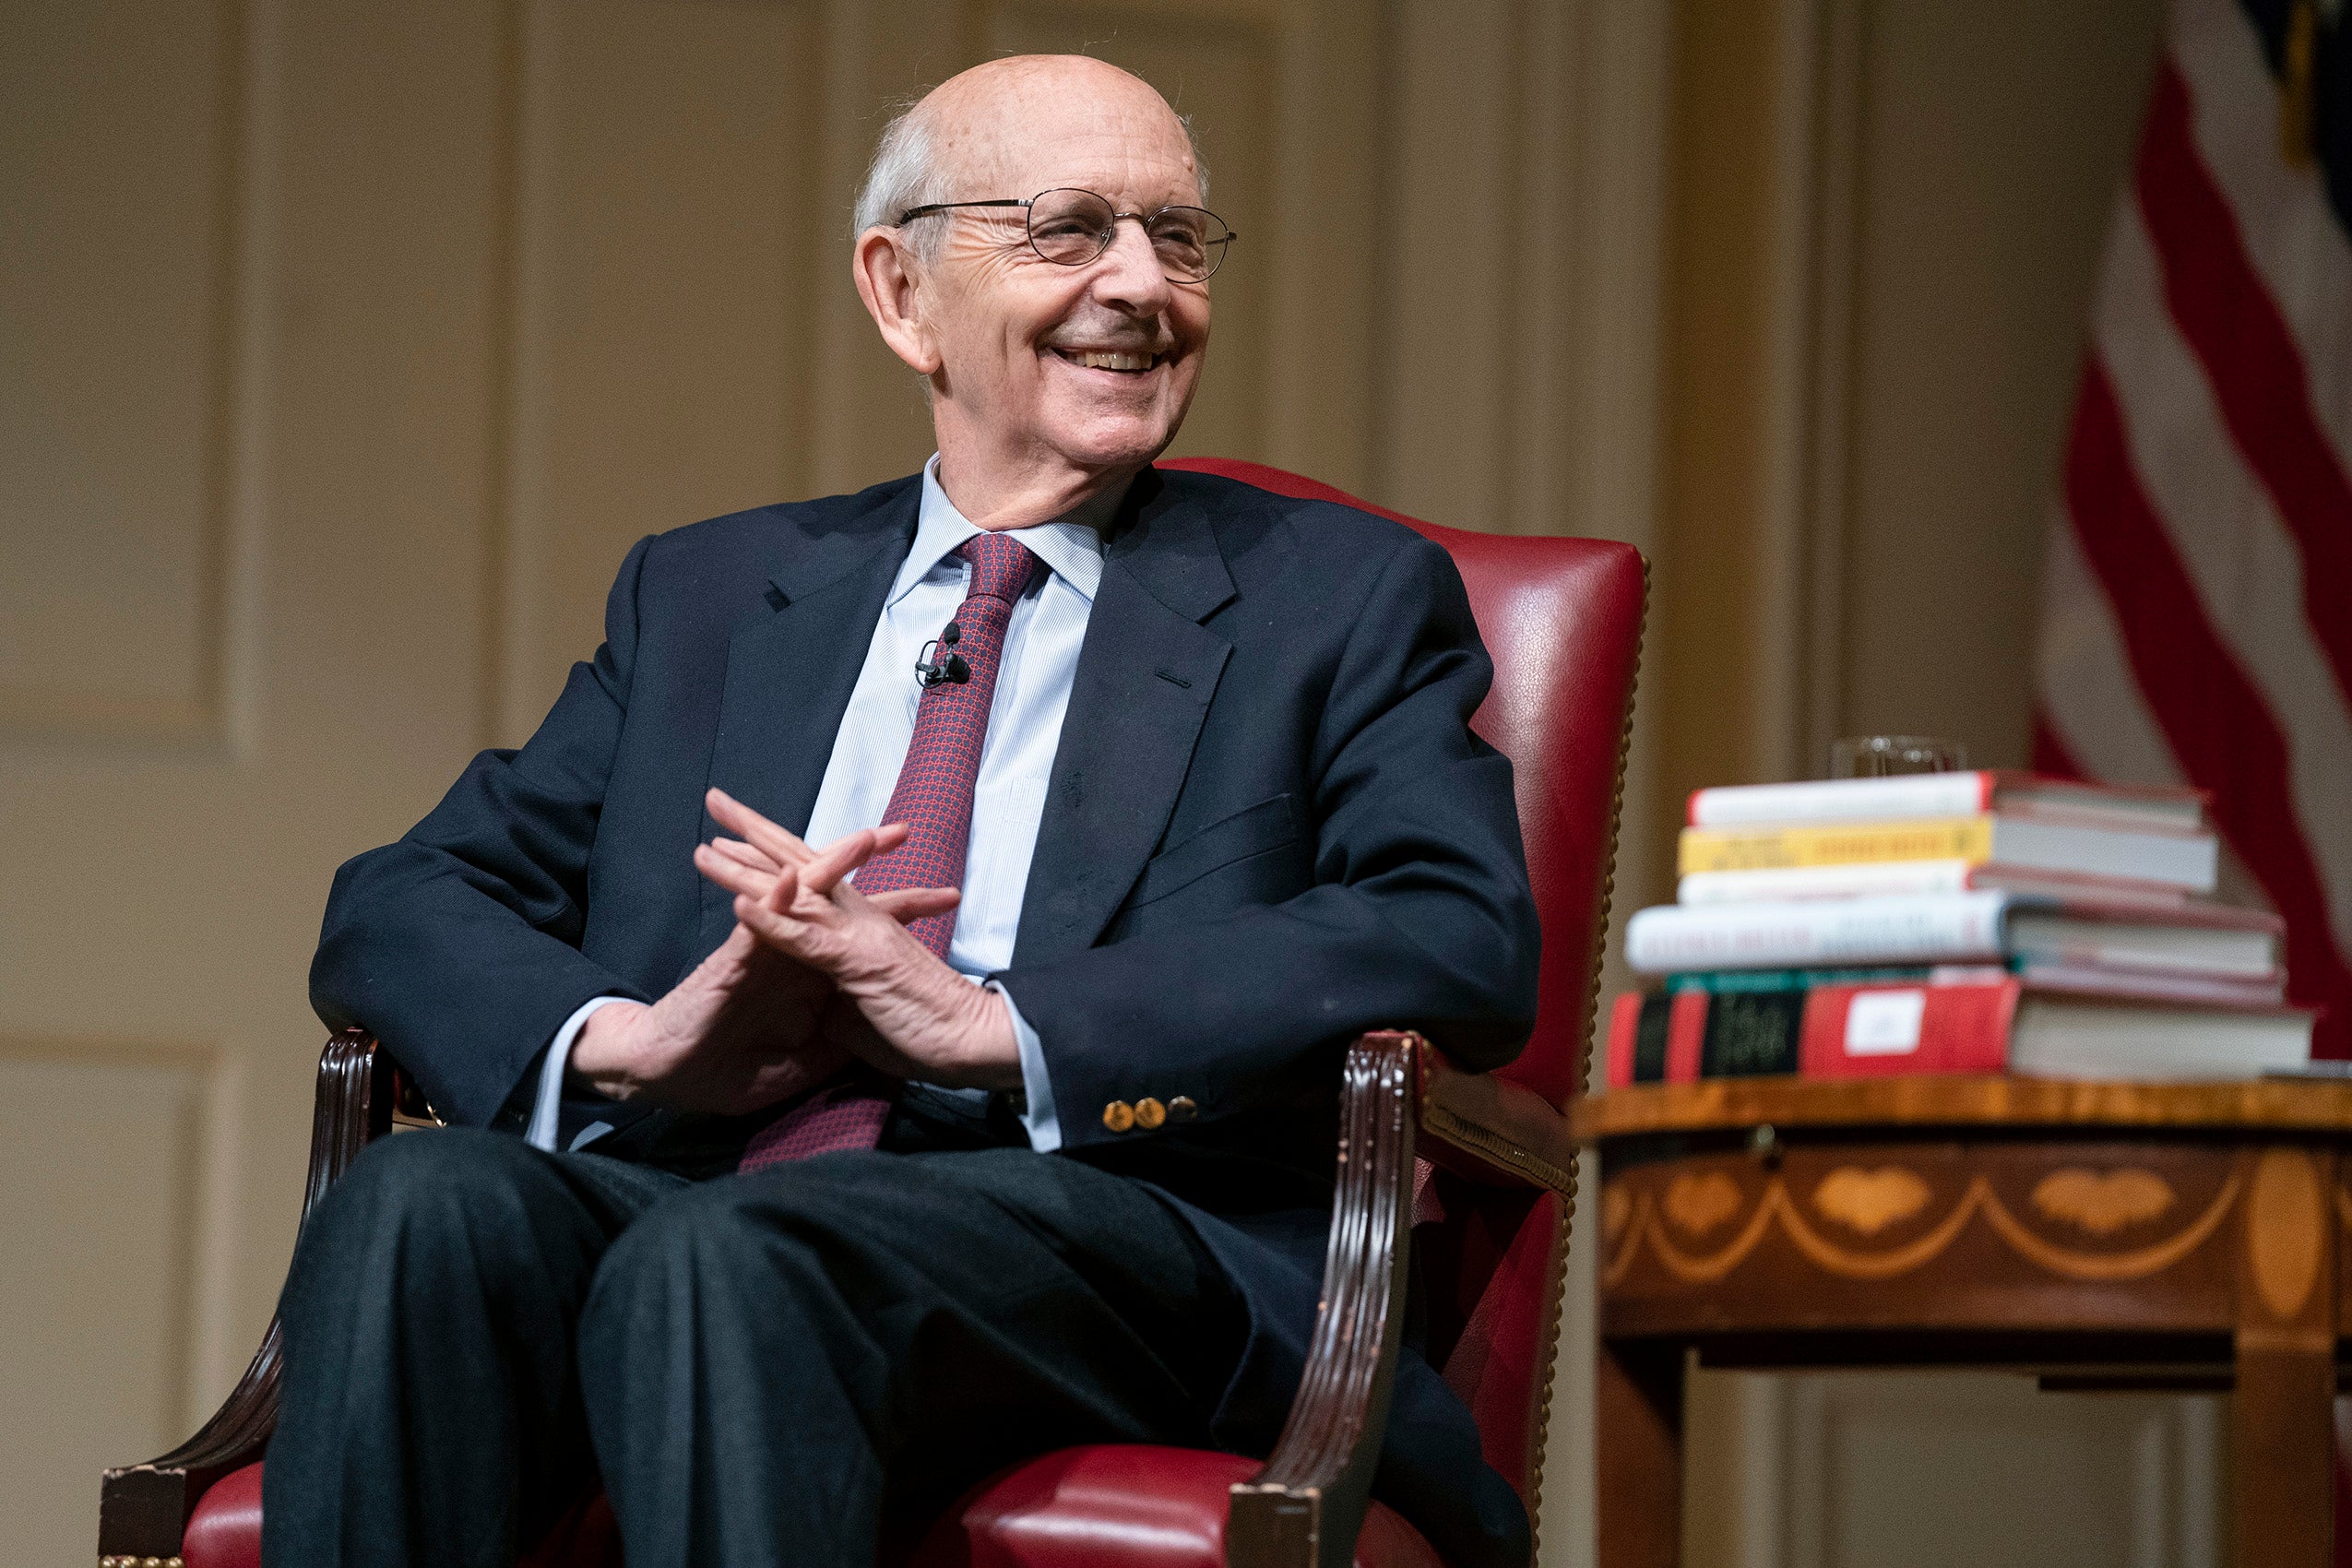 Stephen Breyer seated in a red armchair